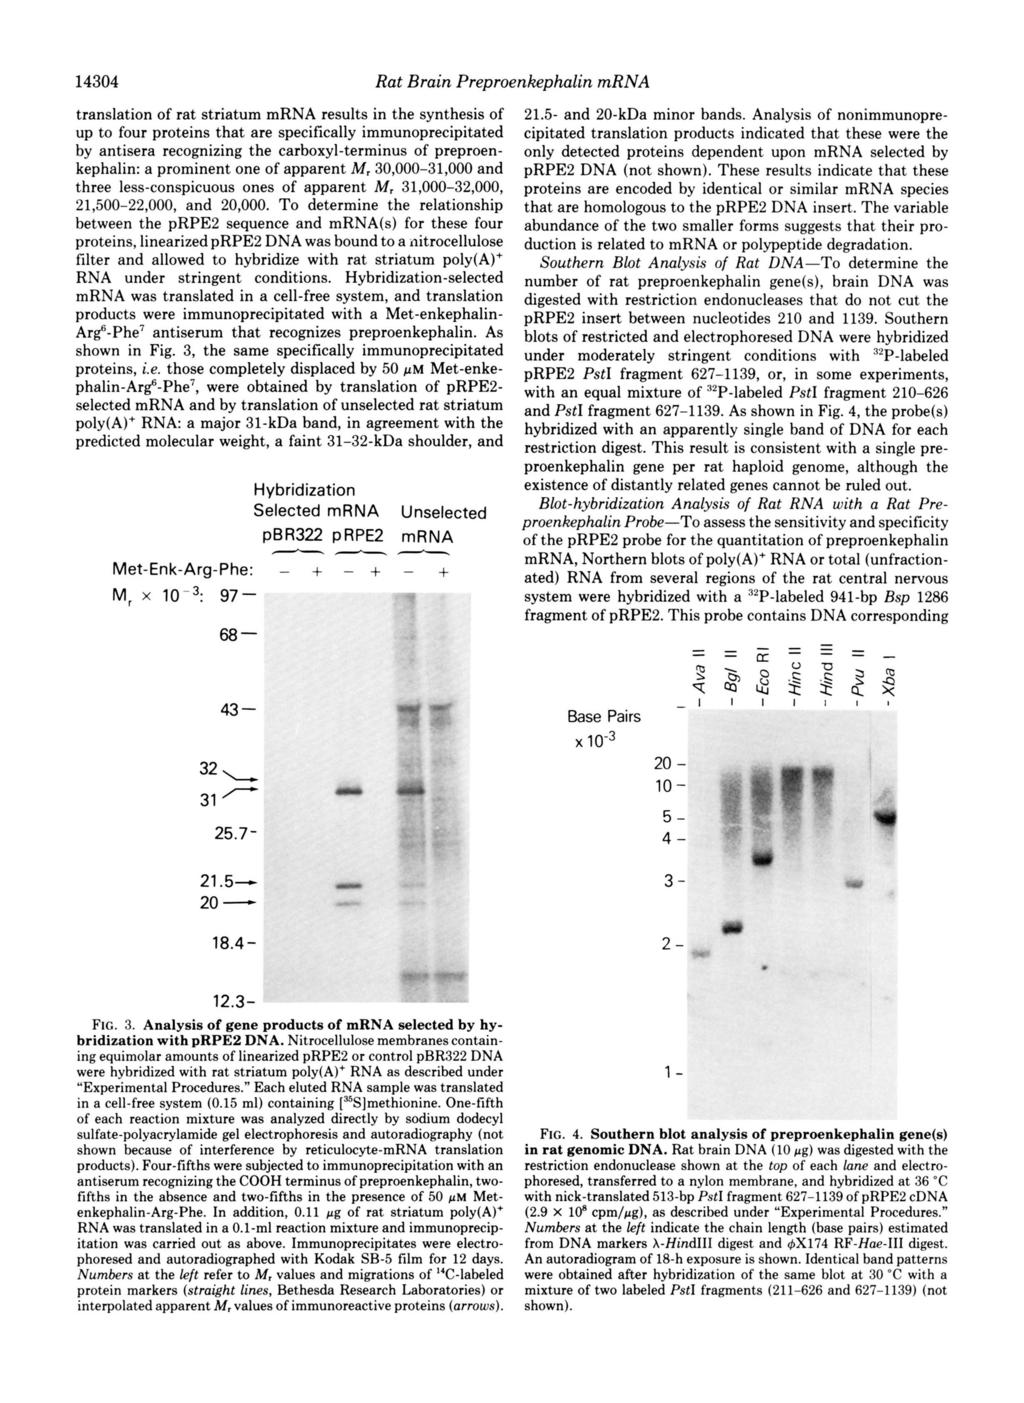 Rat Brain Preproenkephalin mrna 1434 translation of rat striatum mrna results in the synthesisof up to four proteins that are specifically immunoprecipitated by antisera recognizing the